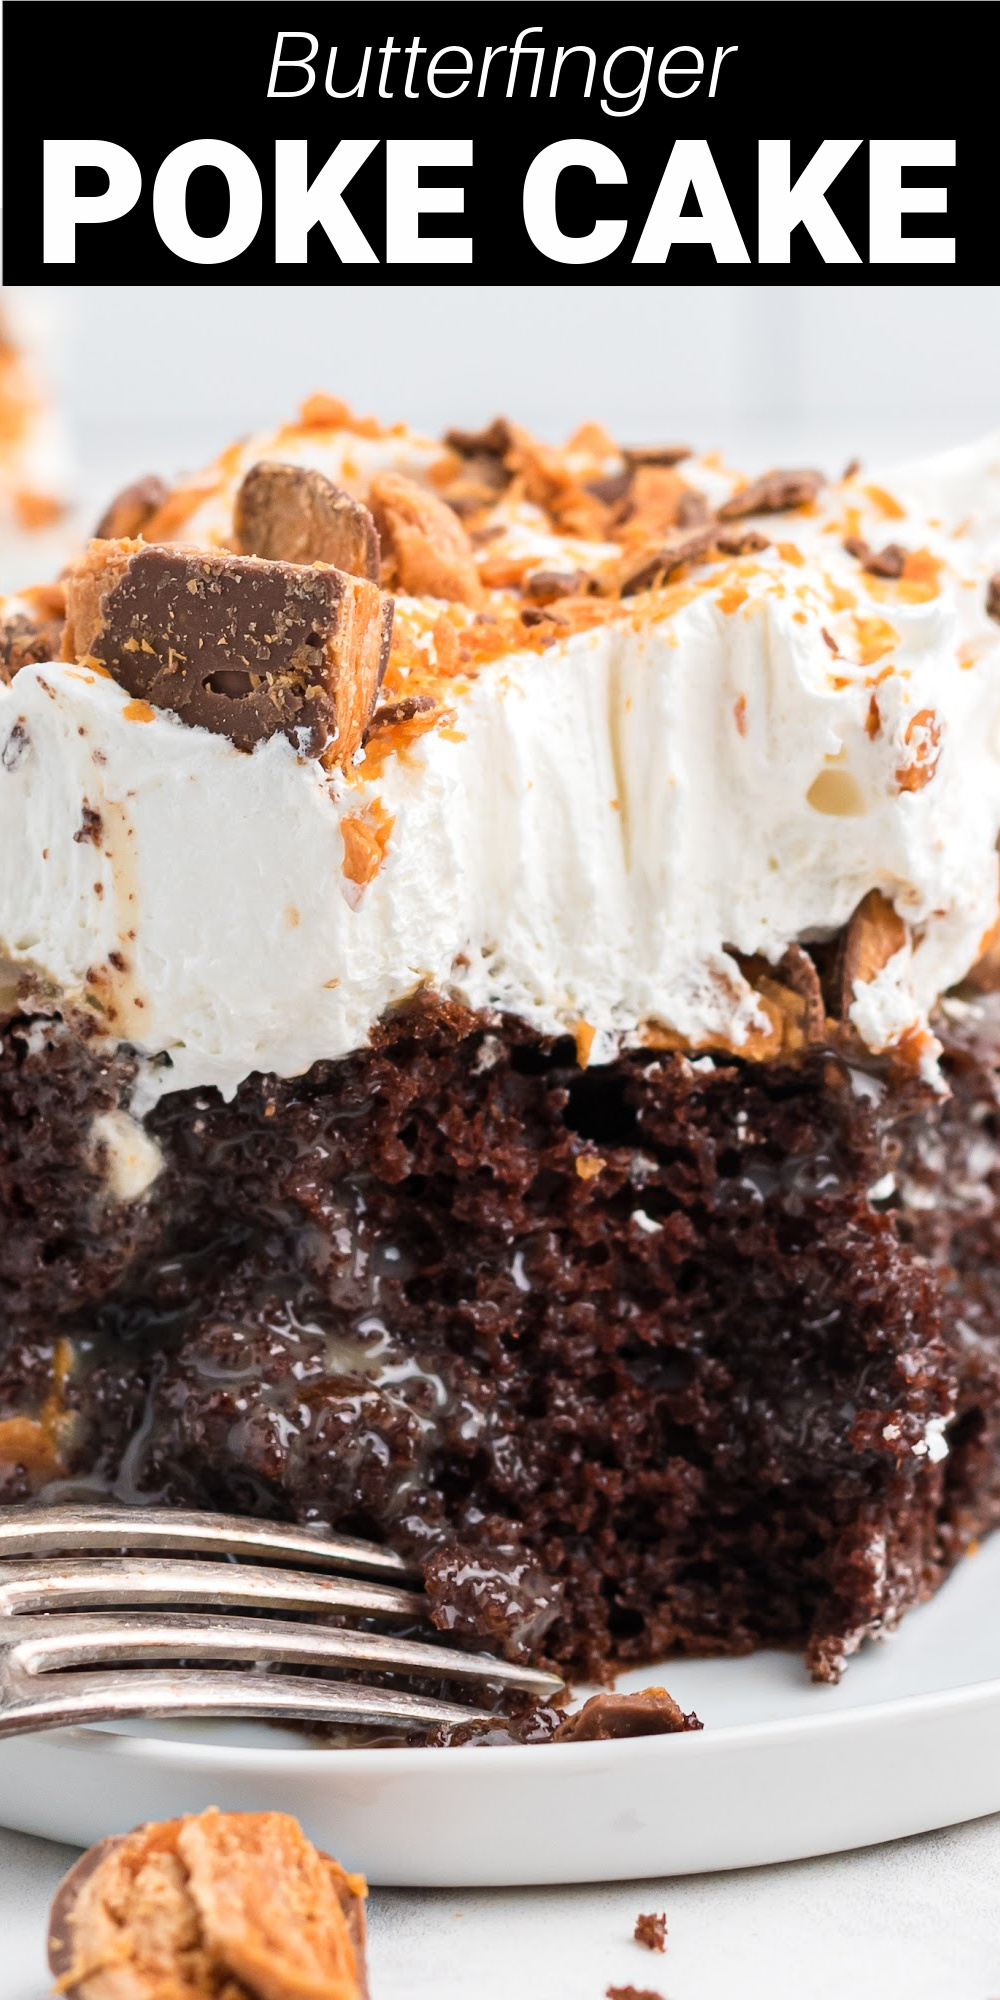 Butterfinger Poke Cake is a chocolate cake with a rich, gooey caramel sauce and topped with whipped cream and “crispety, crunchety” Butterfinger candy pieces. Everyone absolutely loves this cake and it's always a huge hit!